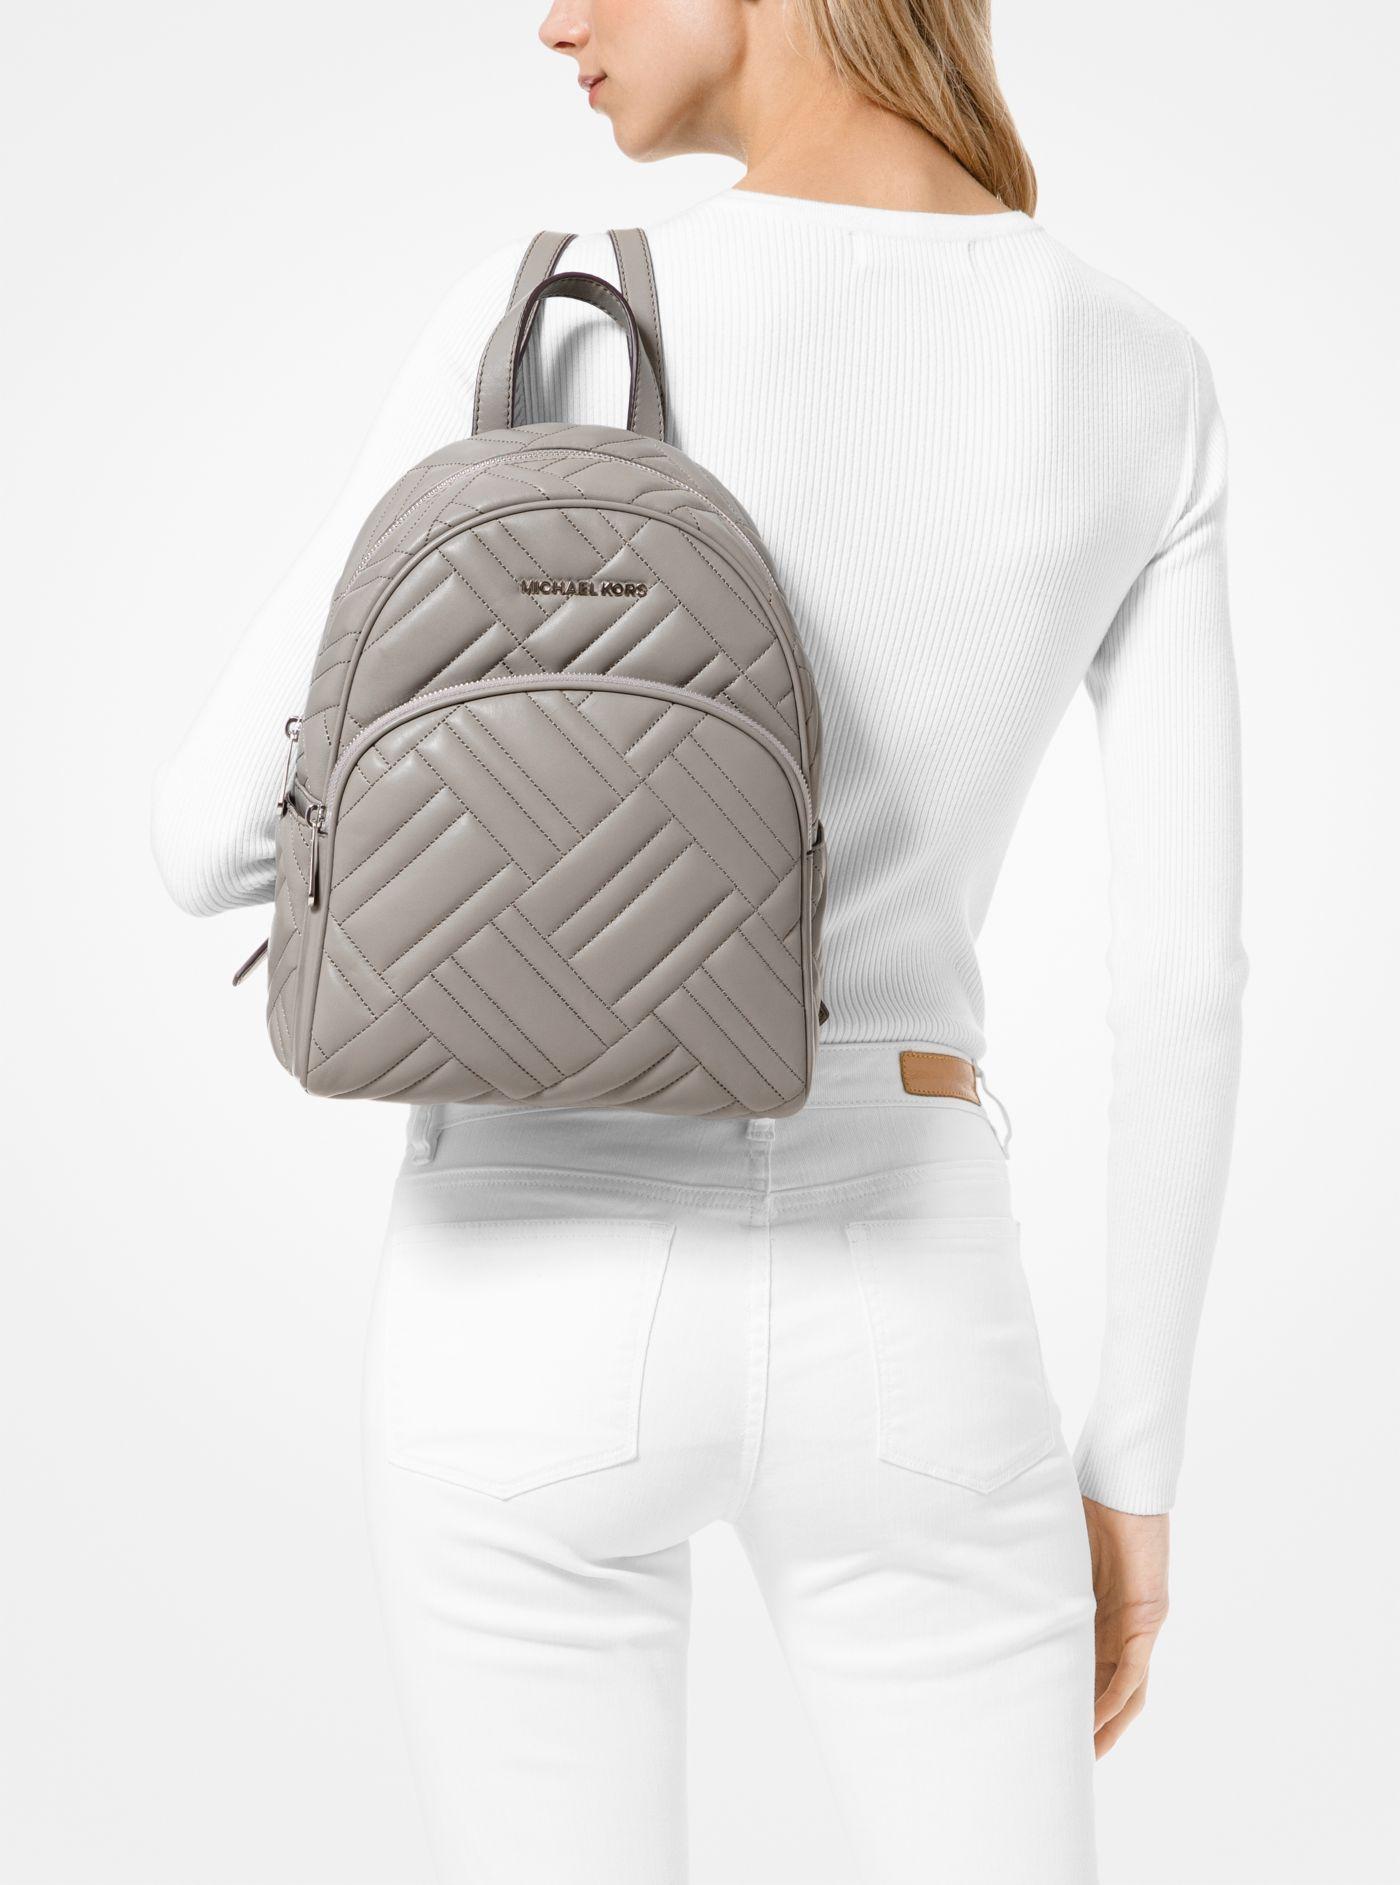 michael kors quilted leather backpack